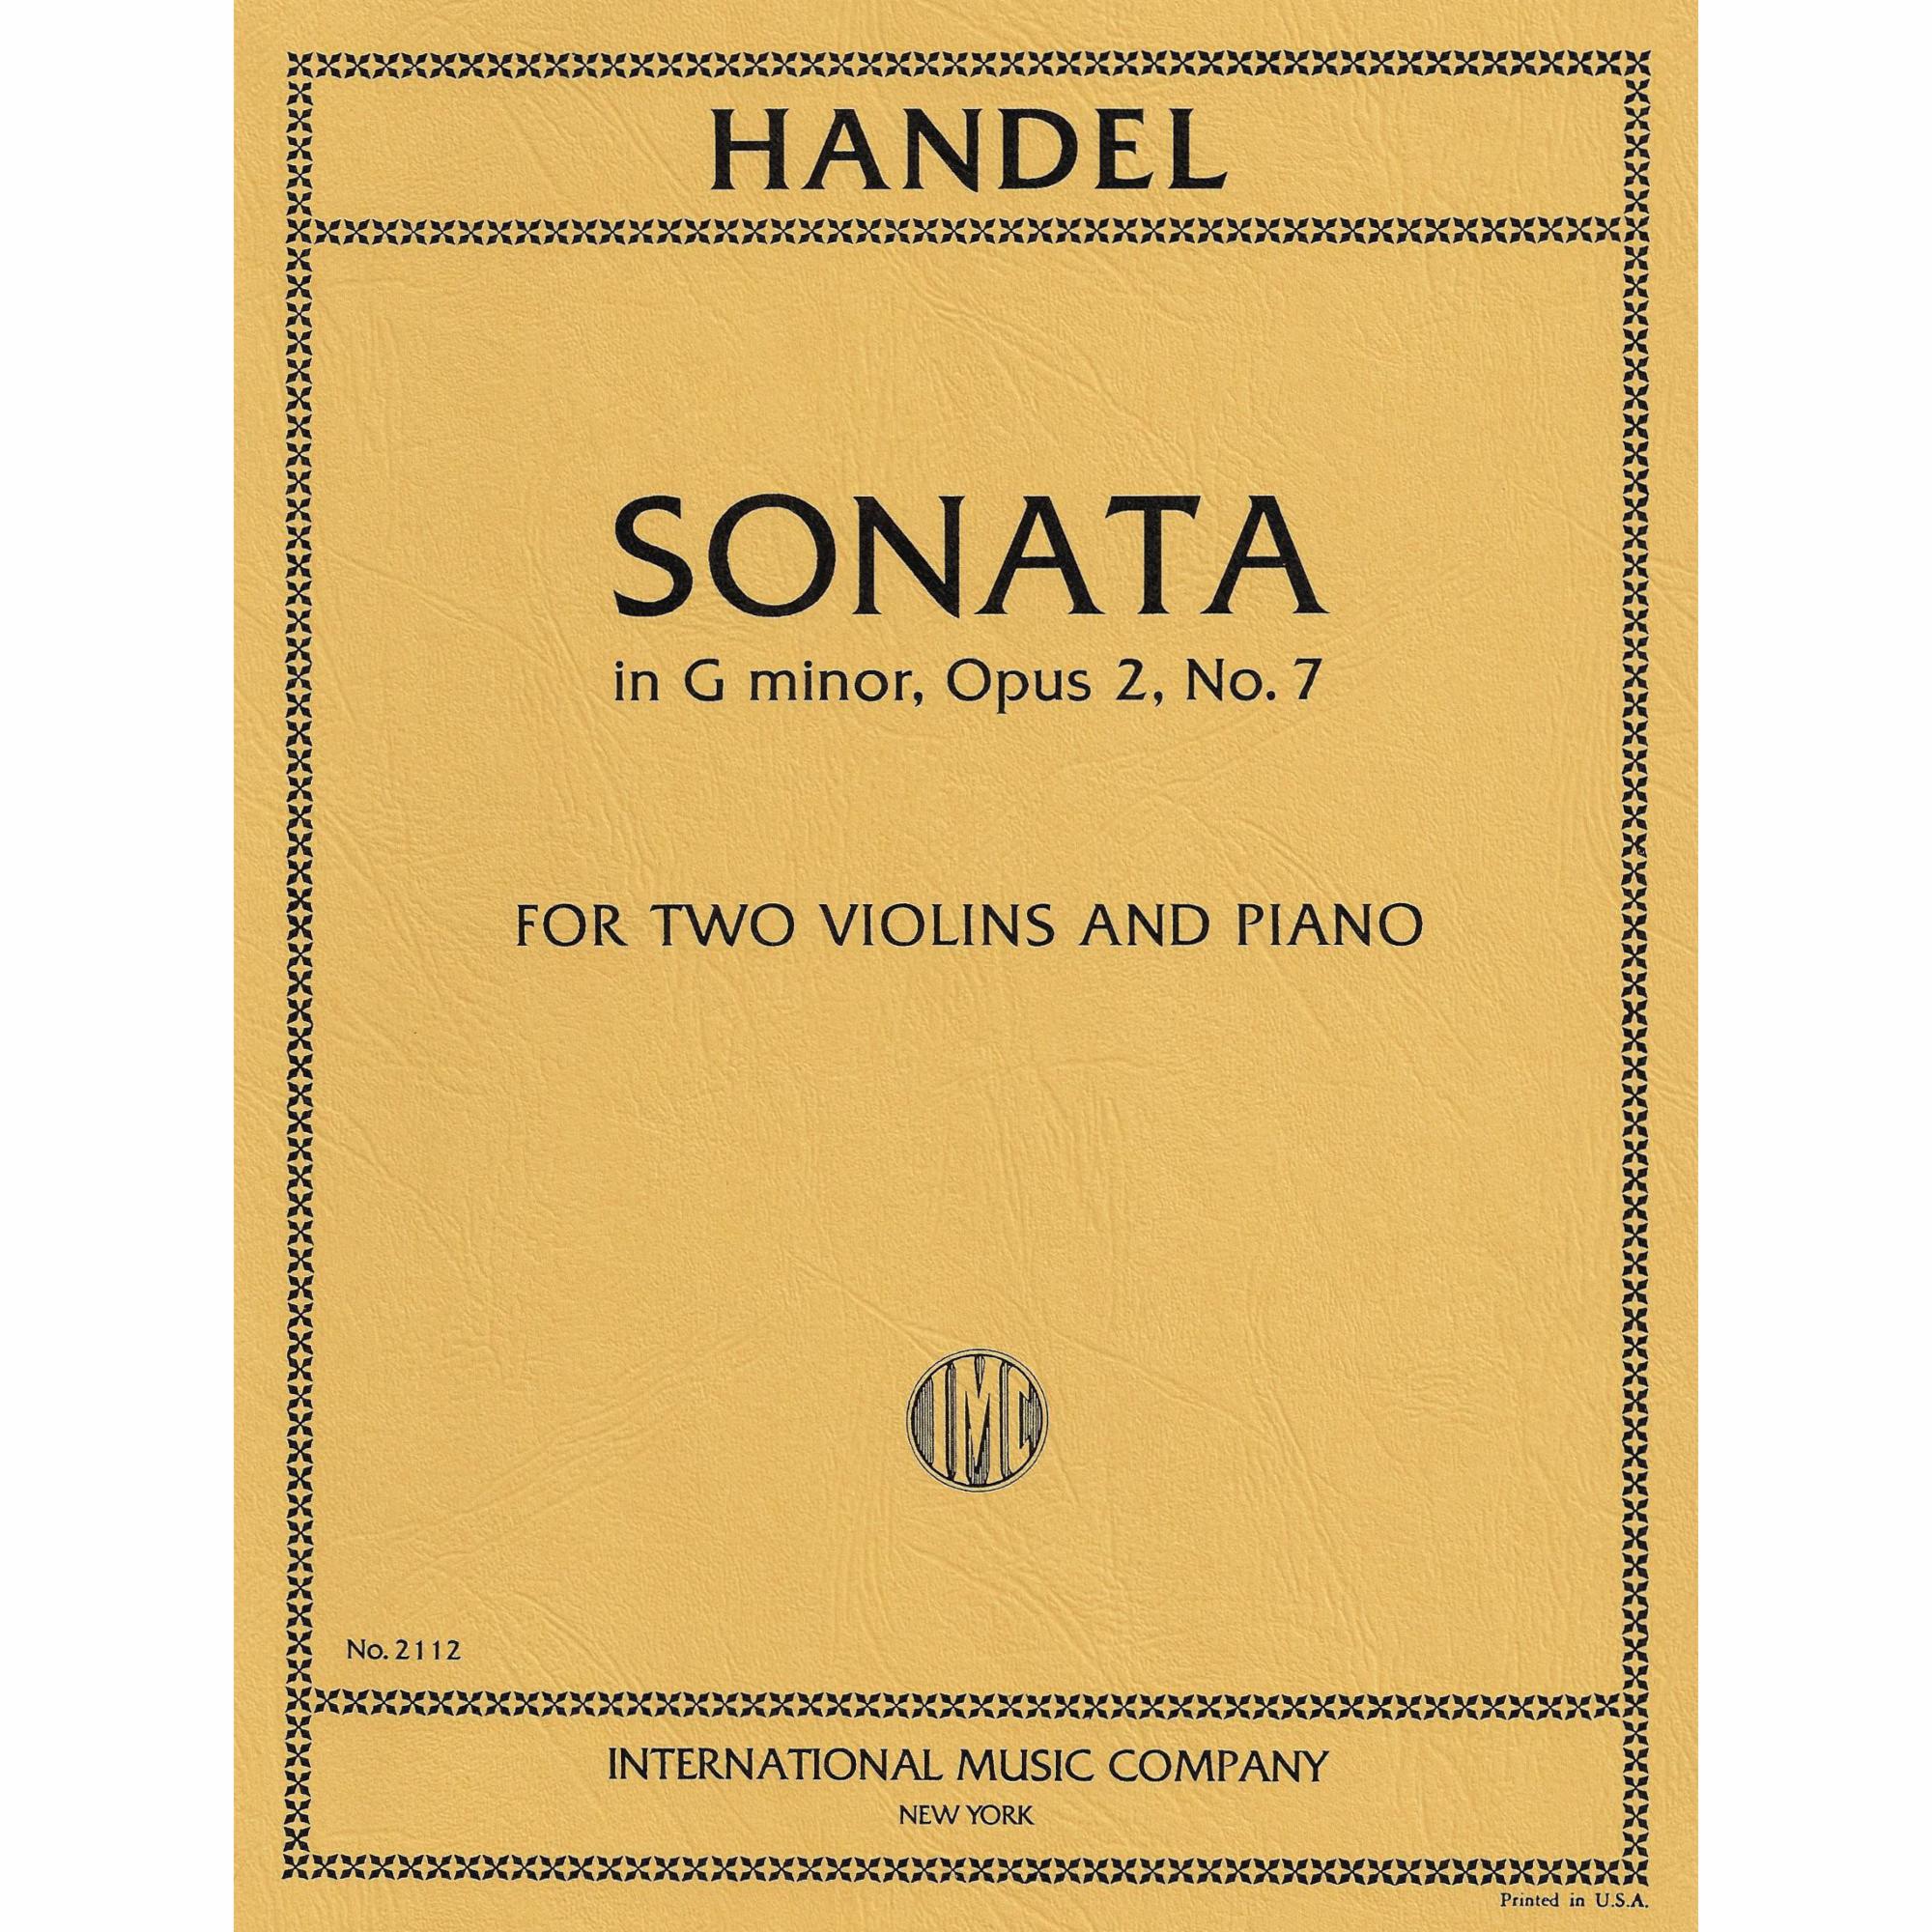 Handel -- Sonata in G Minor, Op. 2, No. 7 for Two Violins and Piano